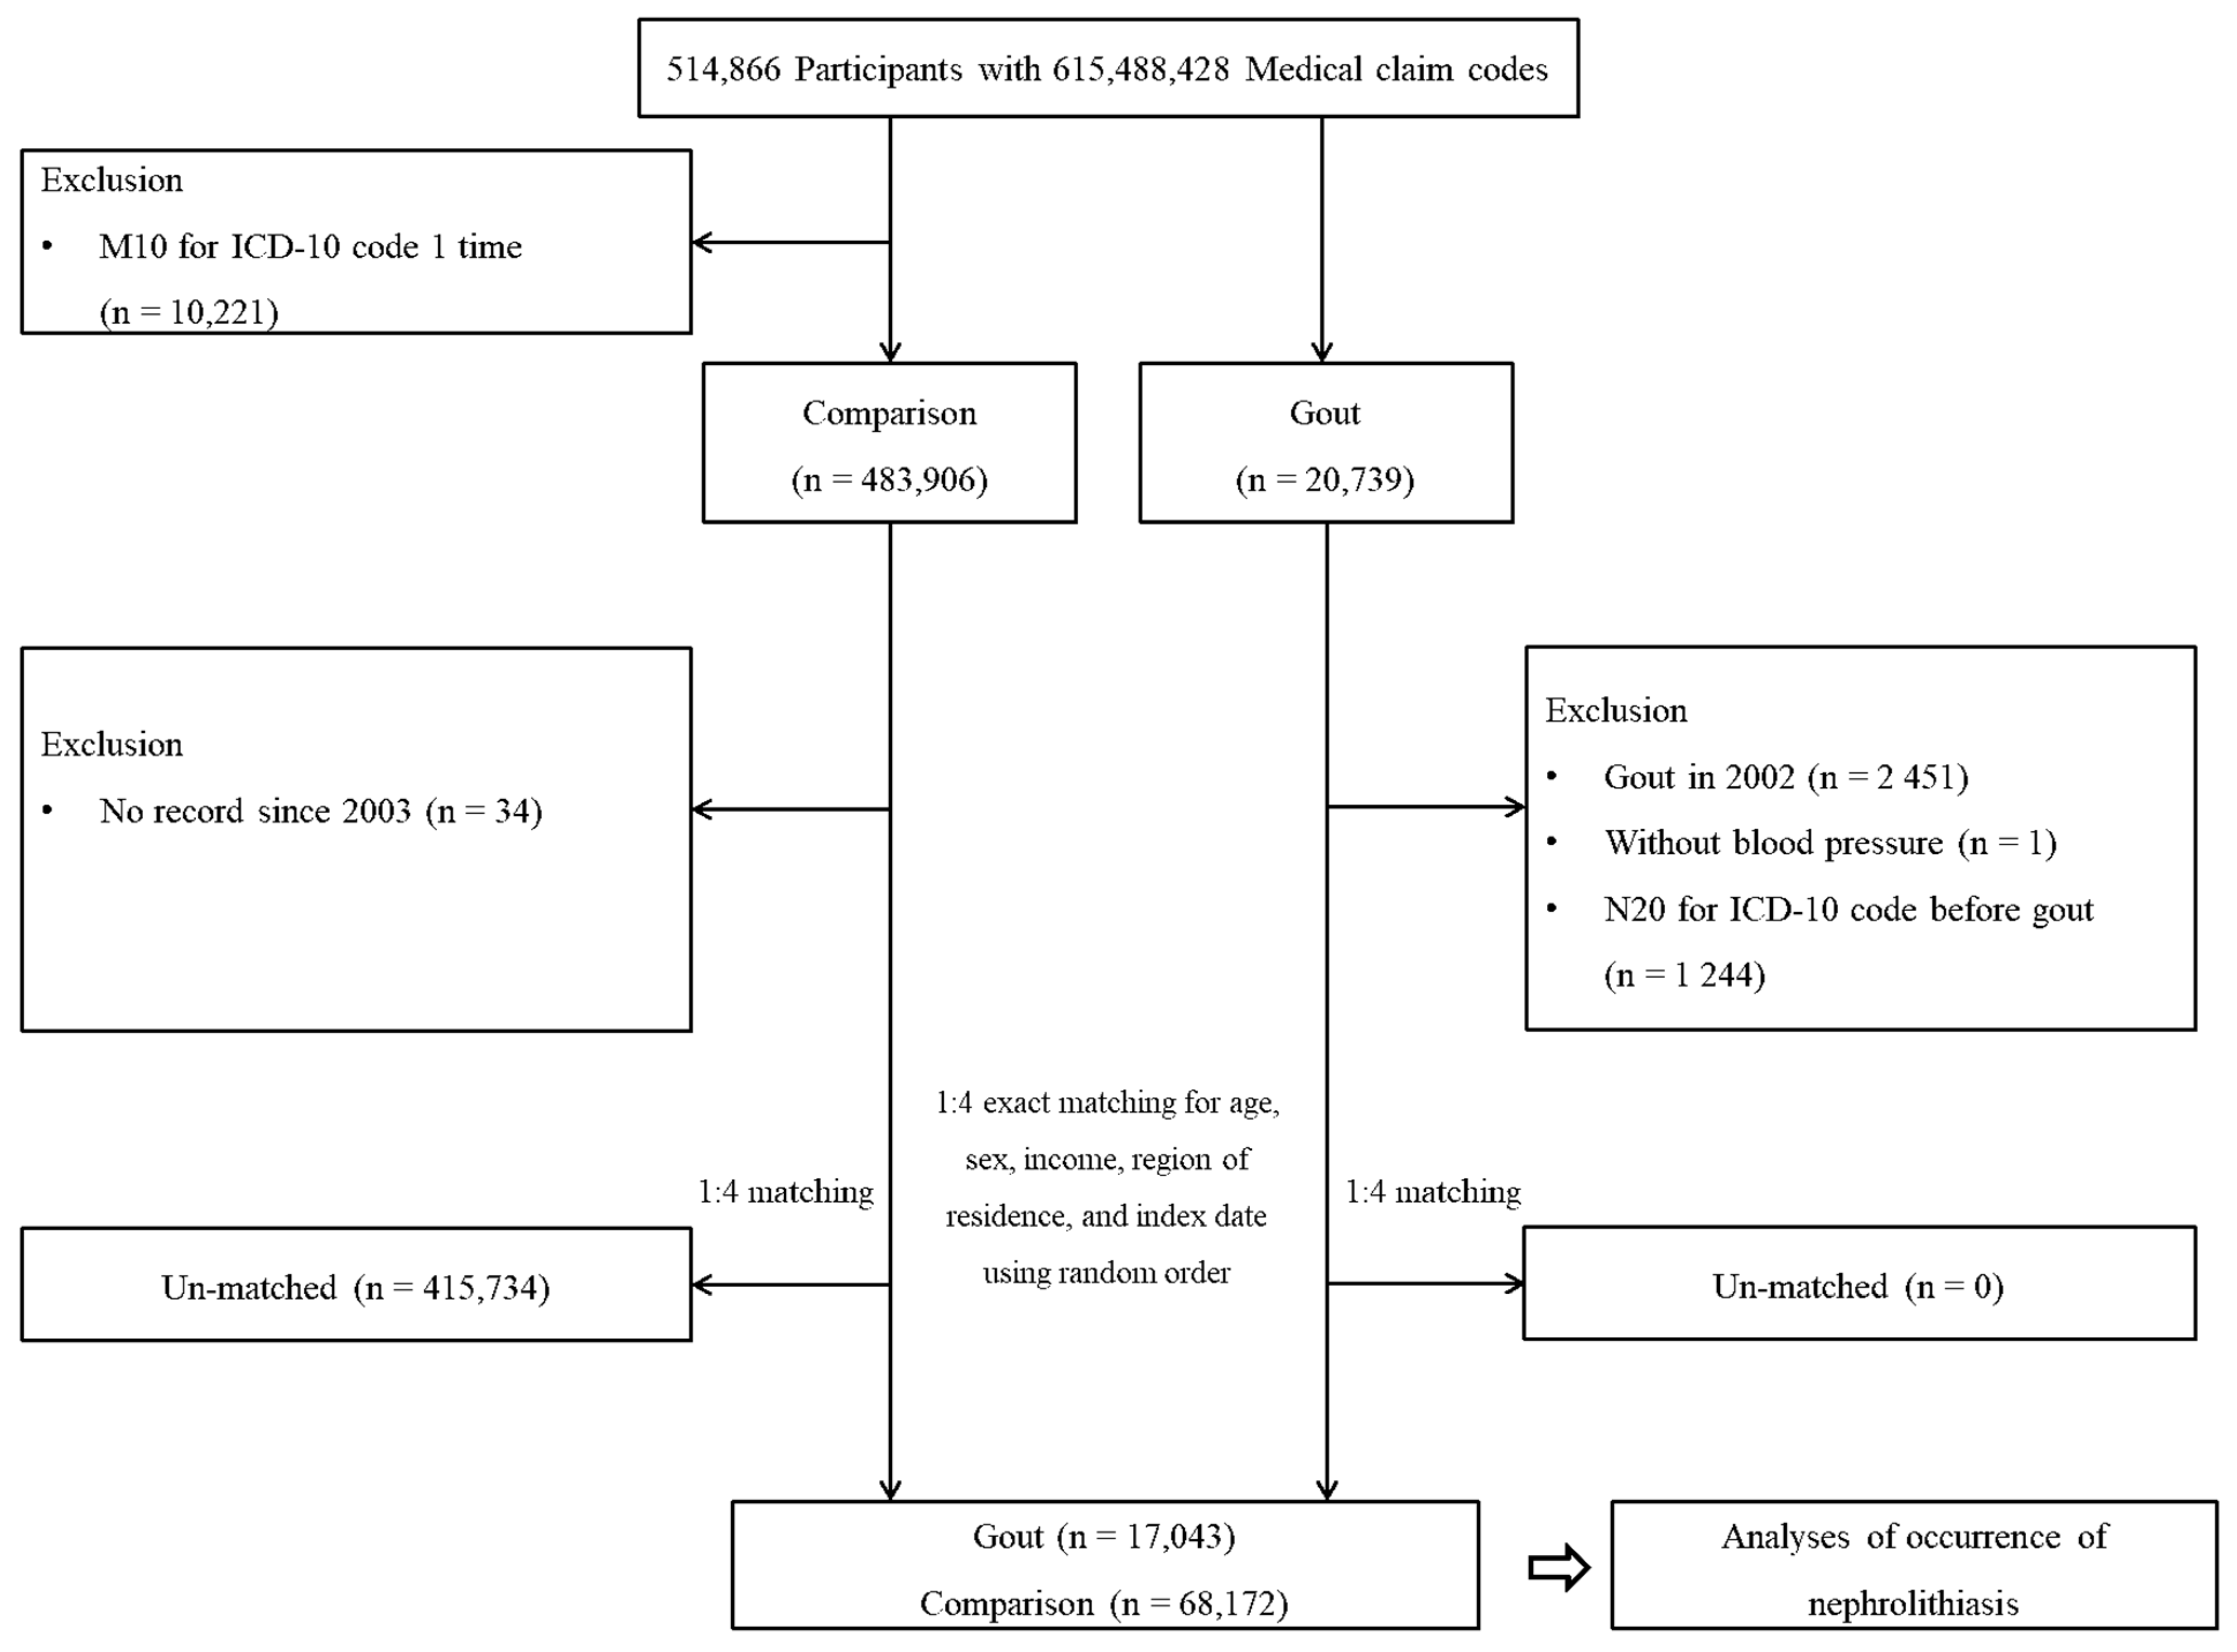 Life Free Full-Text The Occurrence of Nephrolithiasis in Gout Patients A Longitudinal Follow-Up Study Using a National Health Screening Cohort image